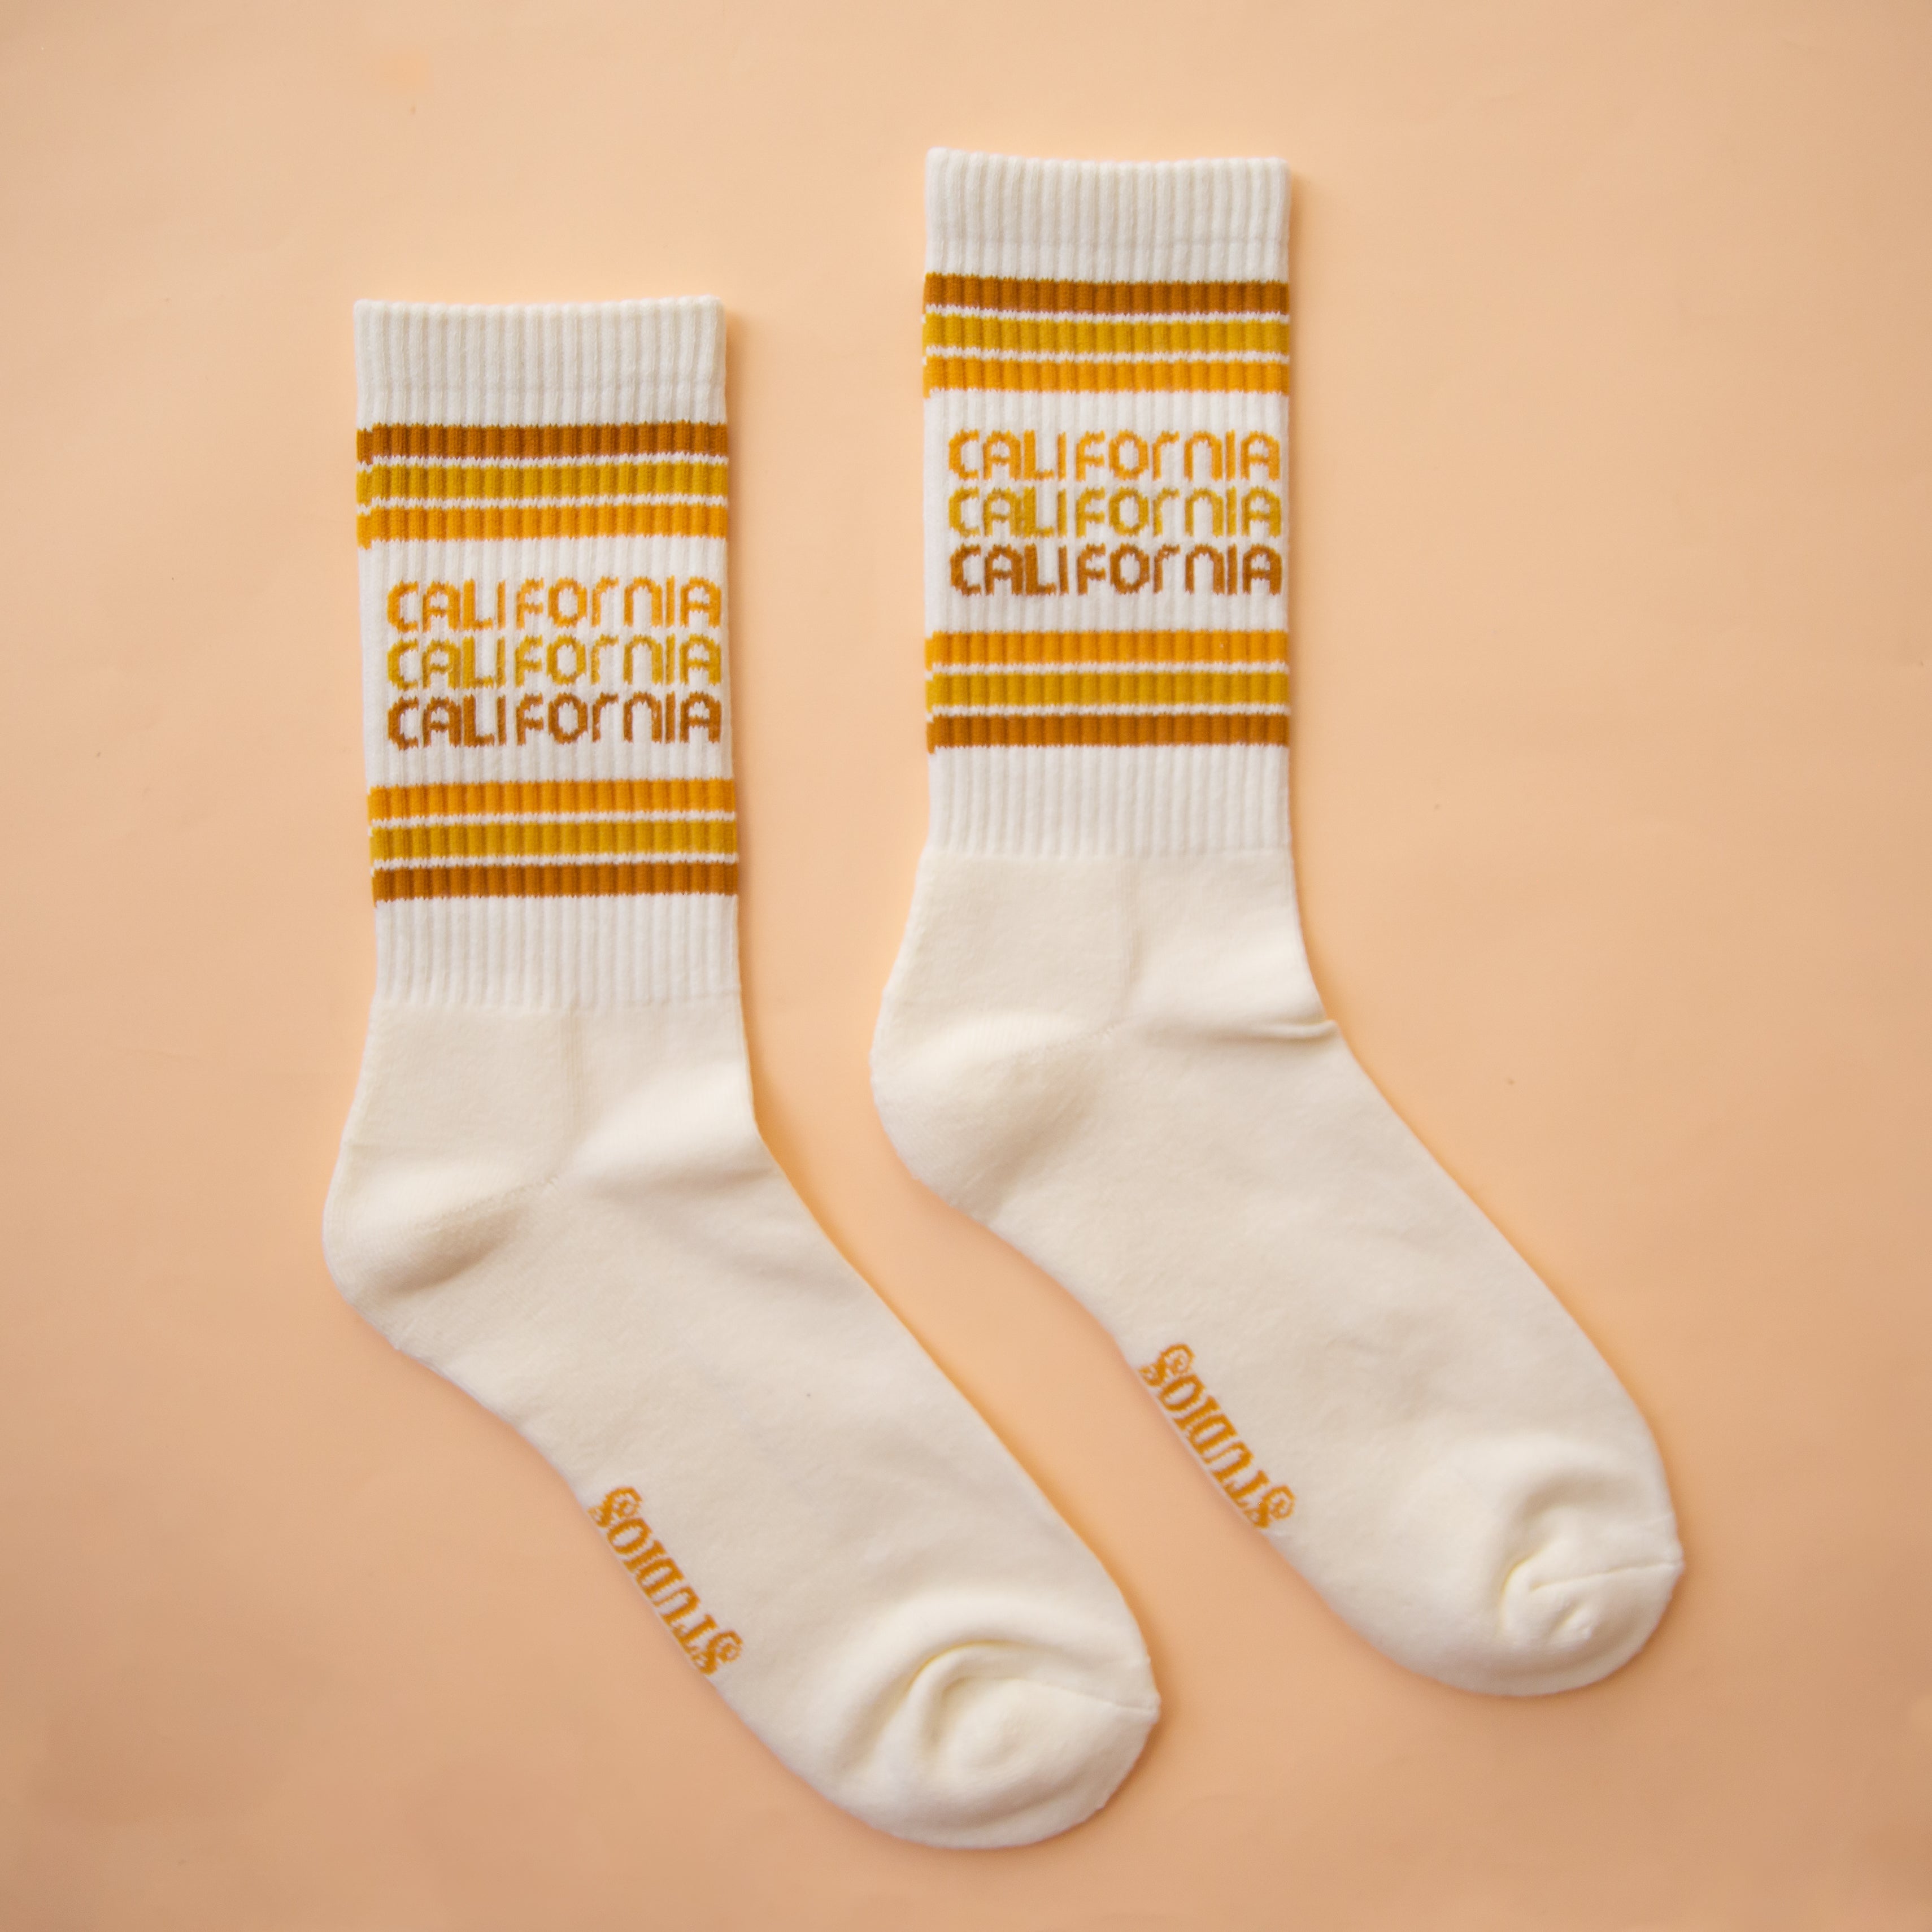 On a peach background is a white socks with rust, yellow and orange stripes and "california" printed three times on the ankle. 